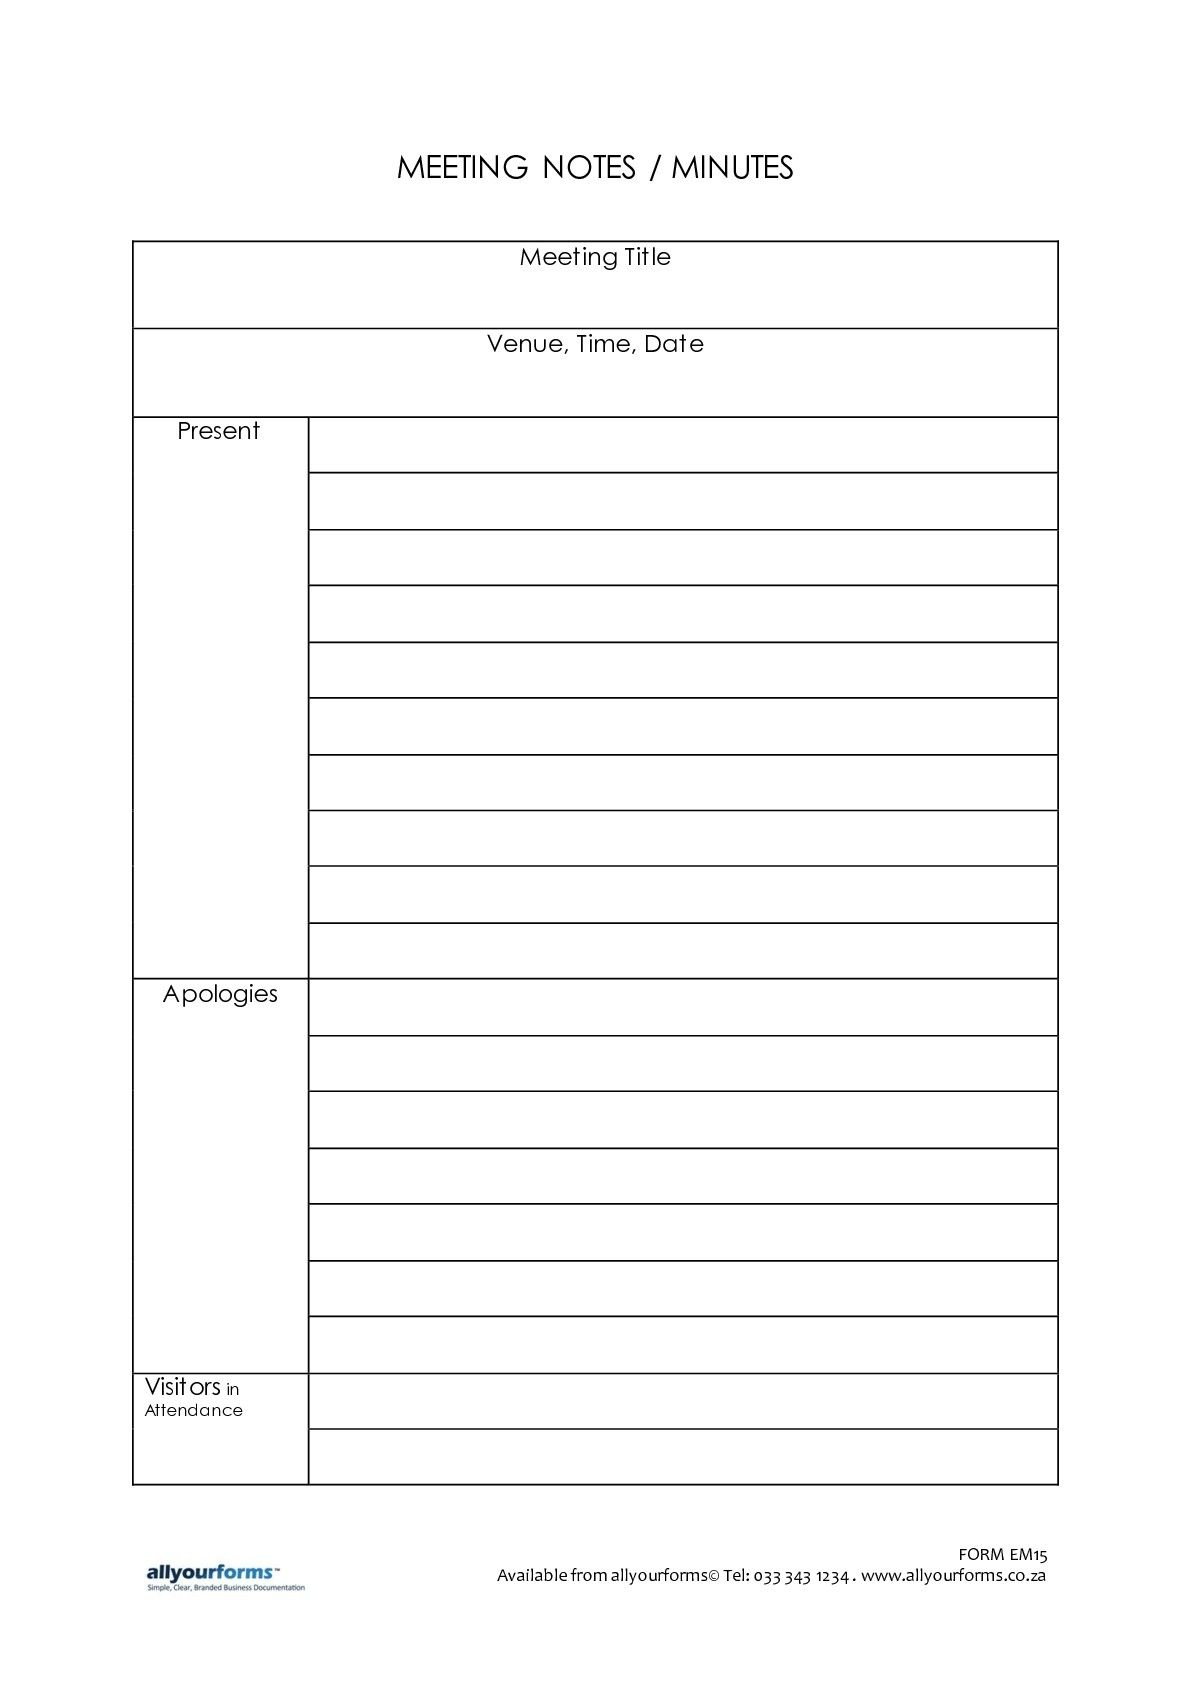 Meeting Notes Template Meeting Notes Template Notes with measurements 1191 X 1685